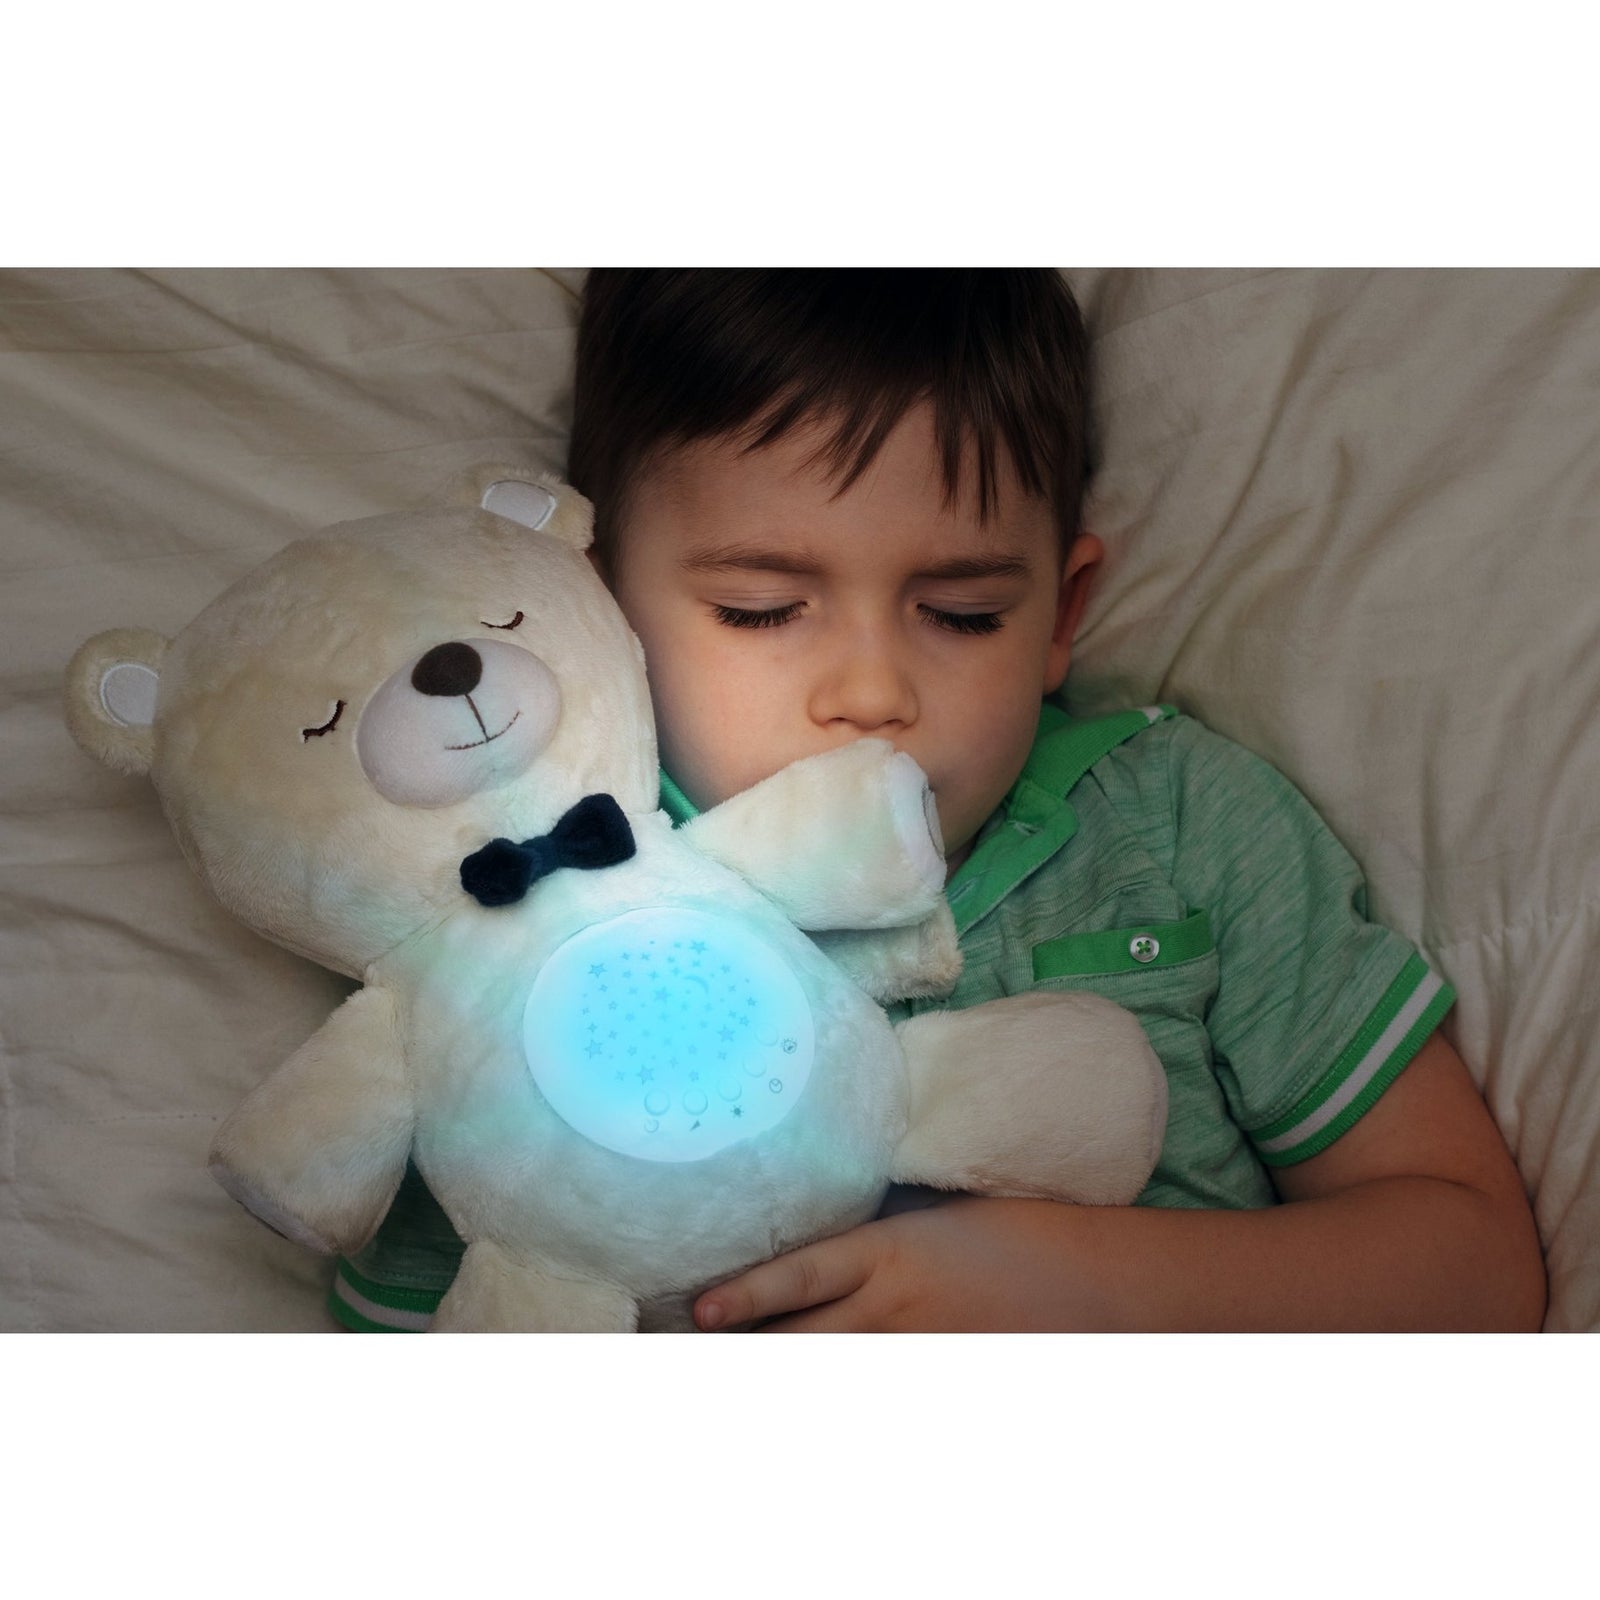 Portable USB Rechargeable Bear Plush Sound Soother by Lumipets